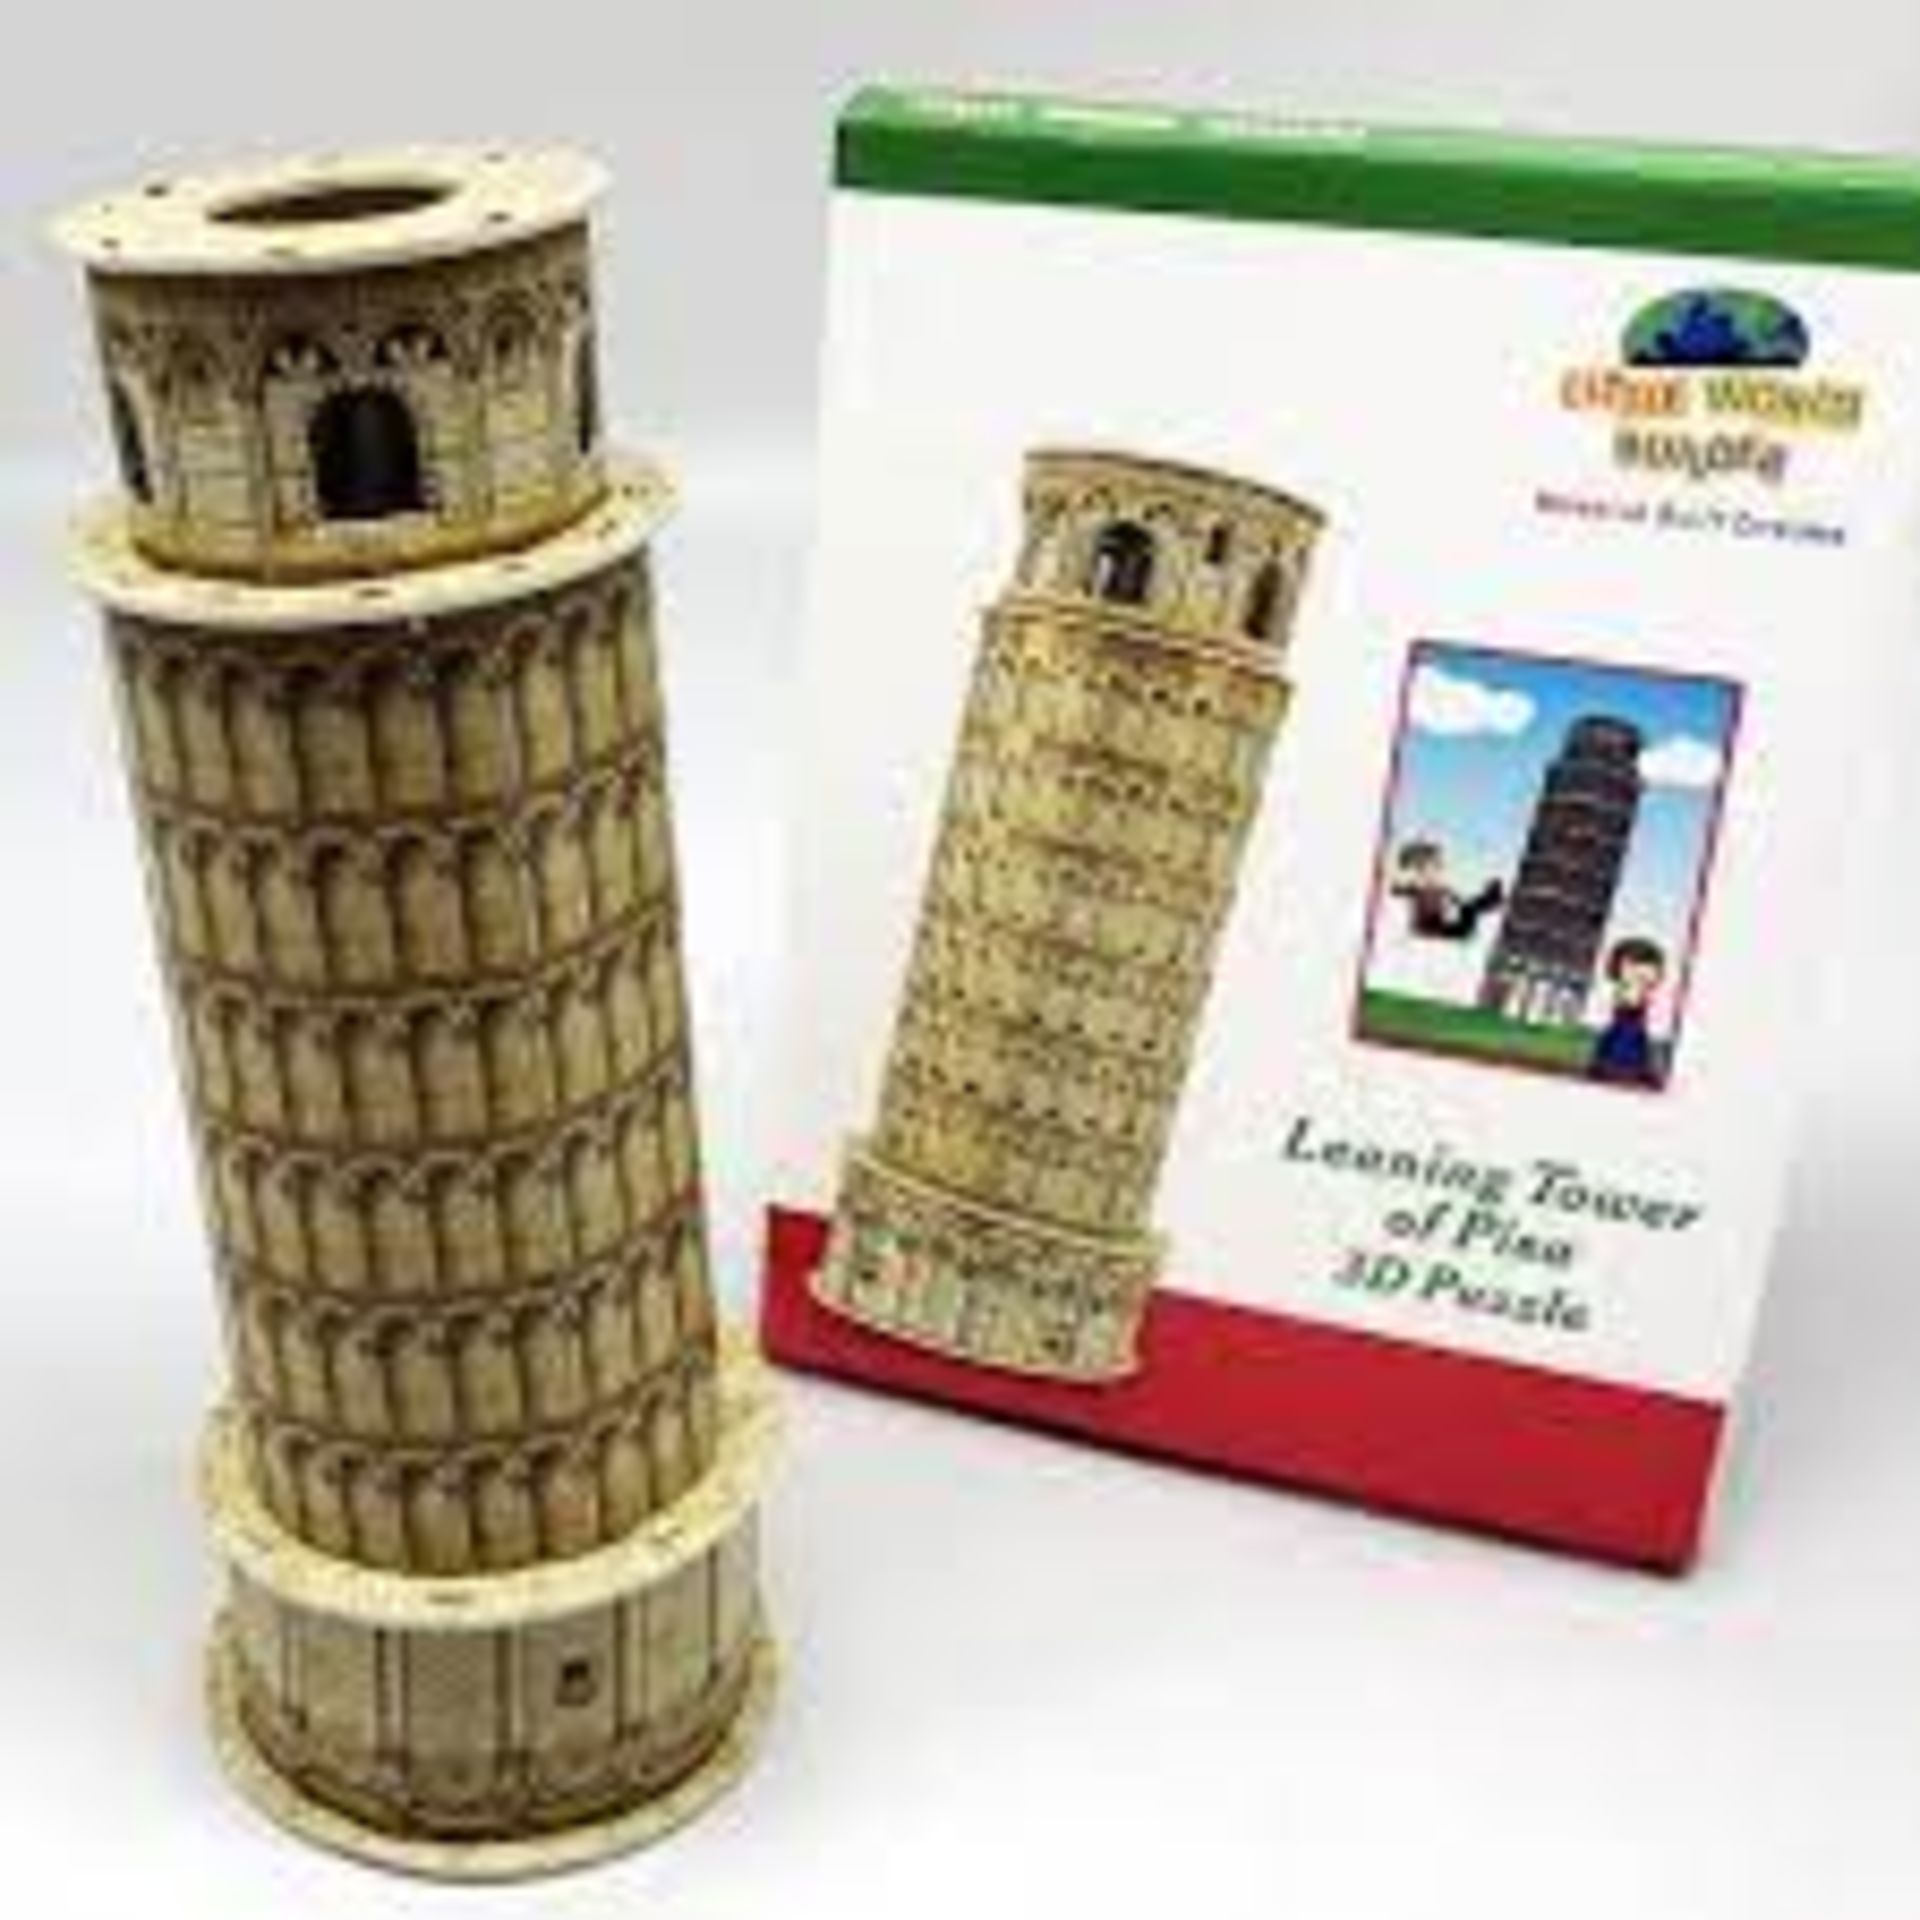 30 X BRAND NEW EDUCTAIONAL LEANING TOWER OF PISA 3D PUZZLES